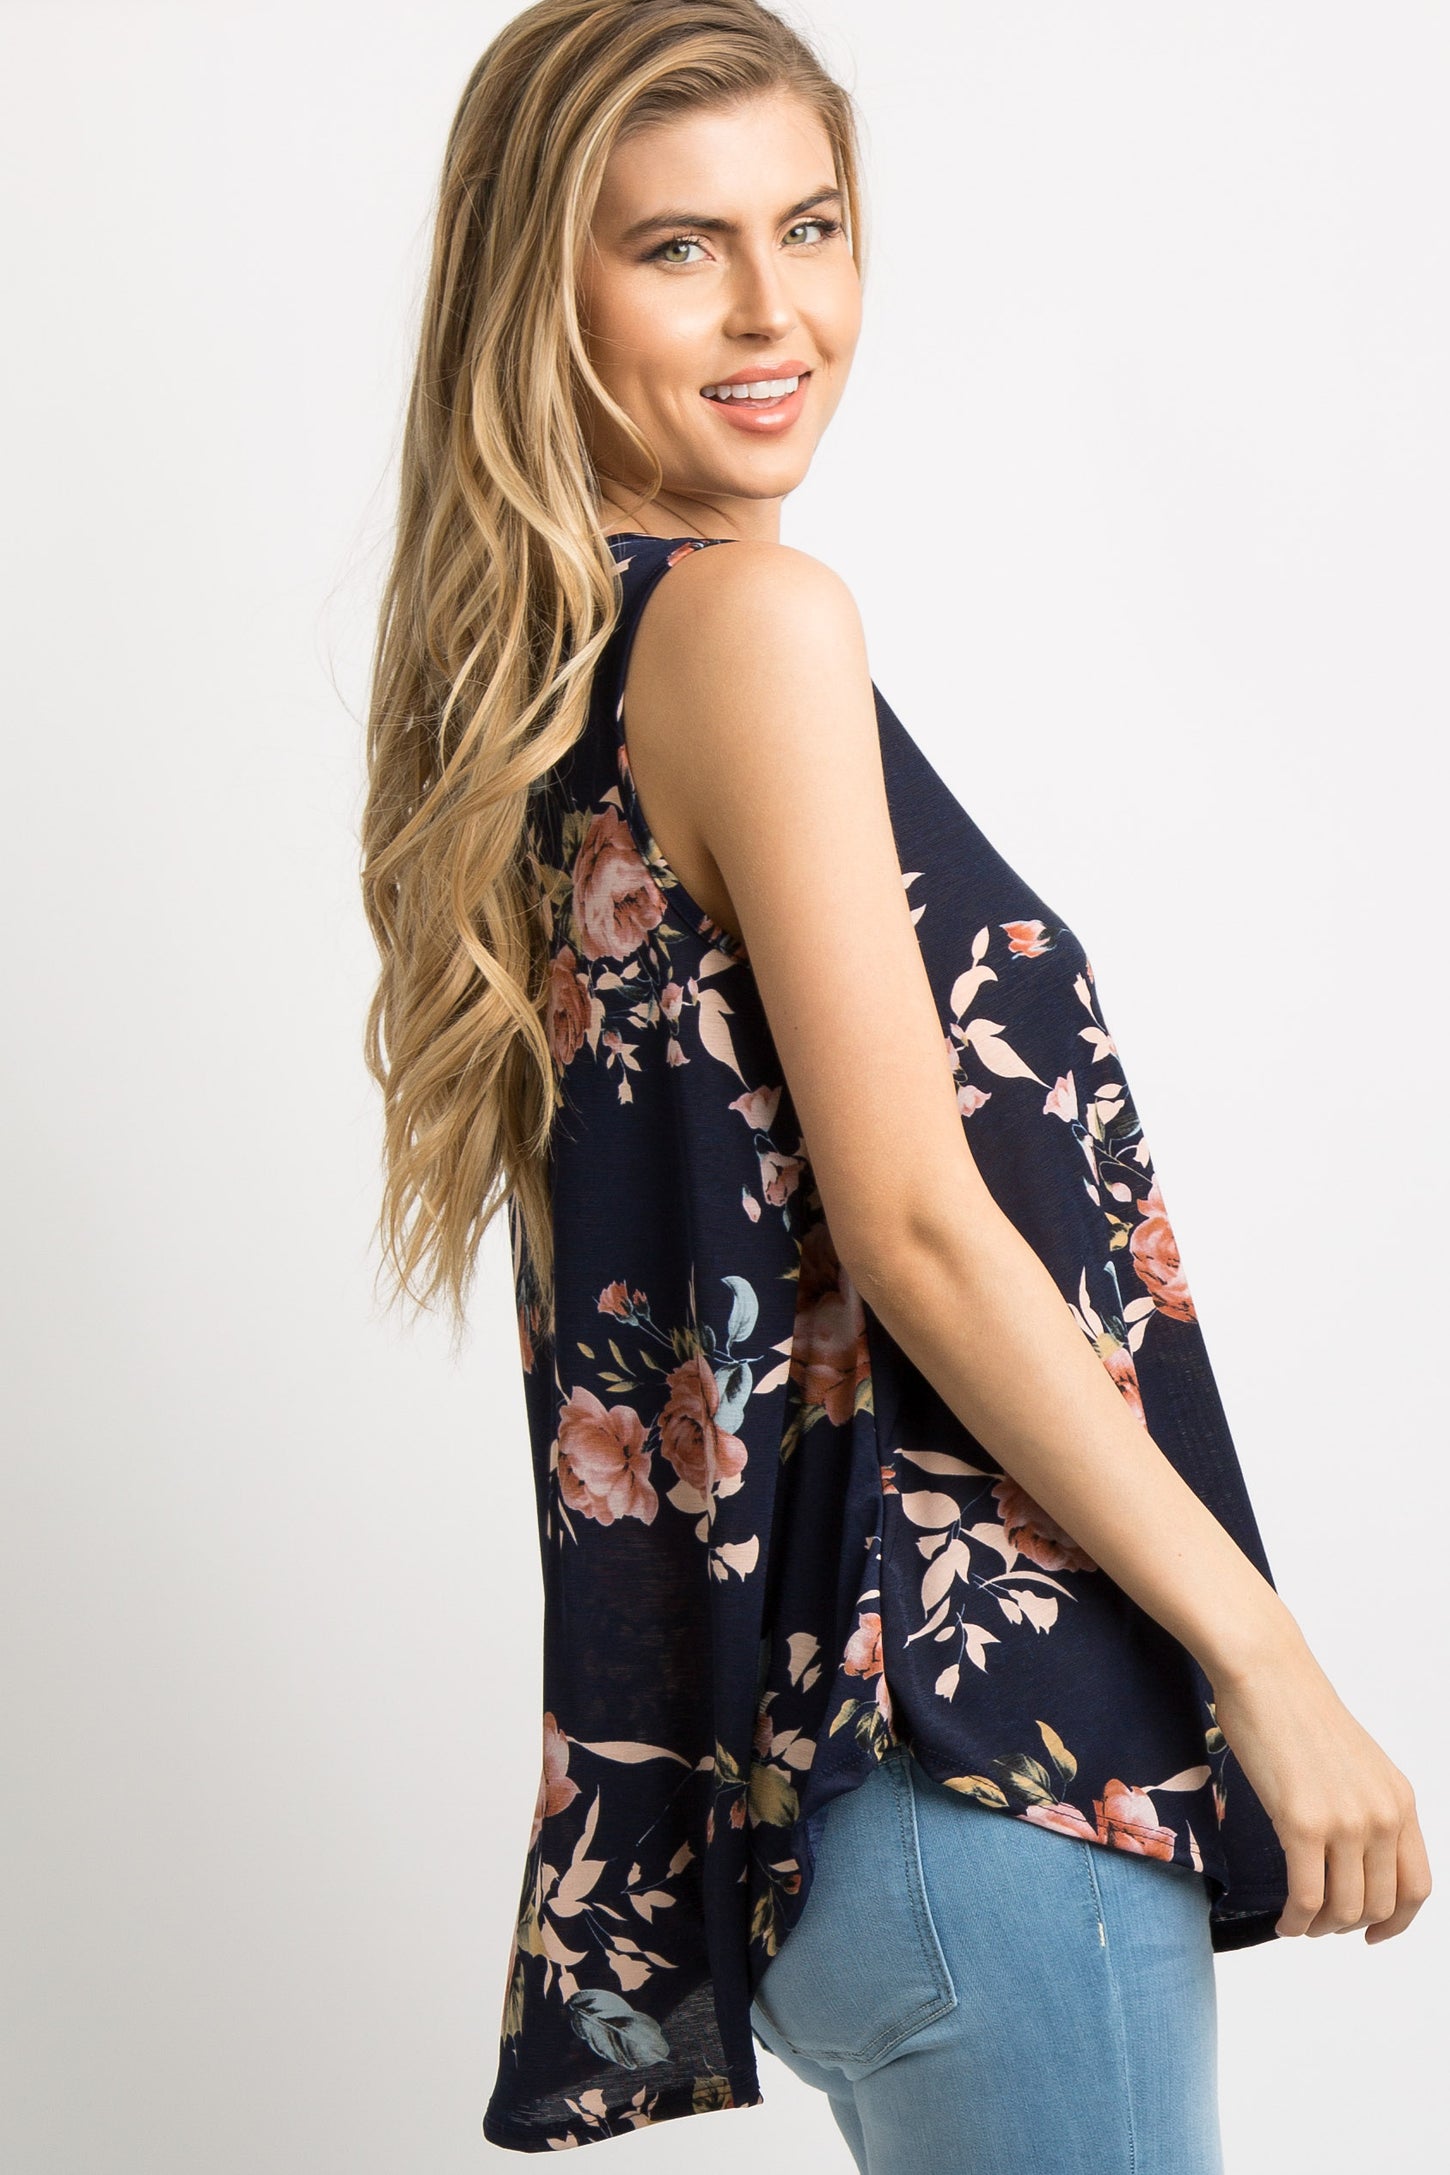 Navy Blue Floral Sleeveless Top